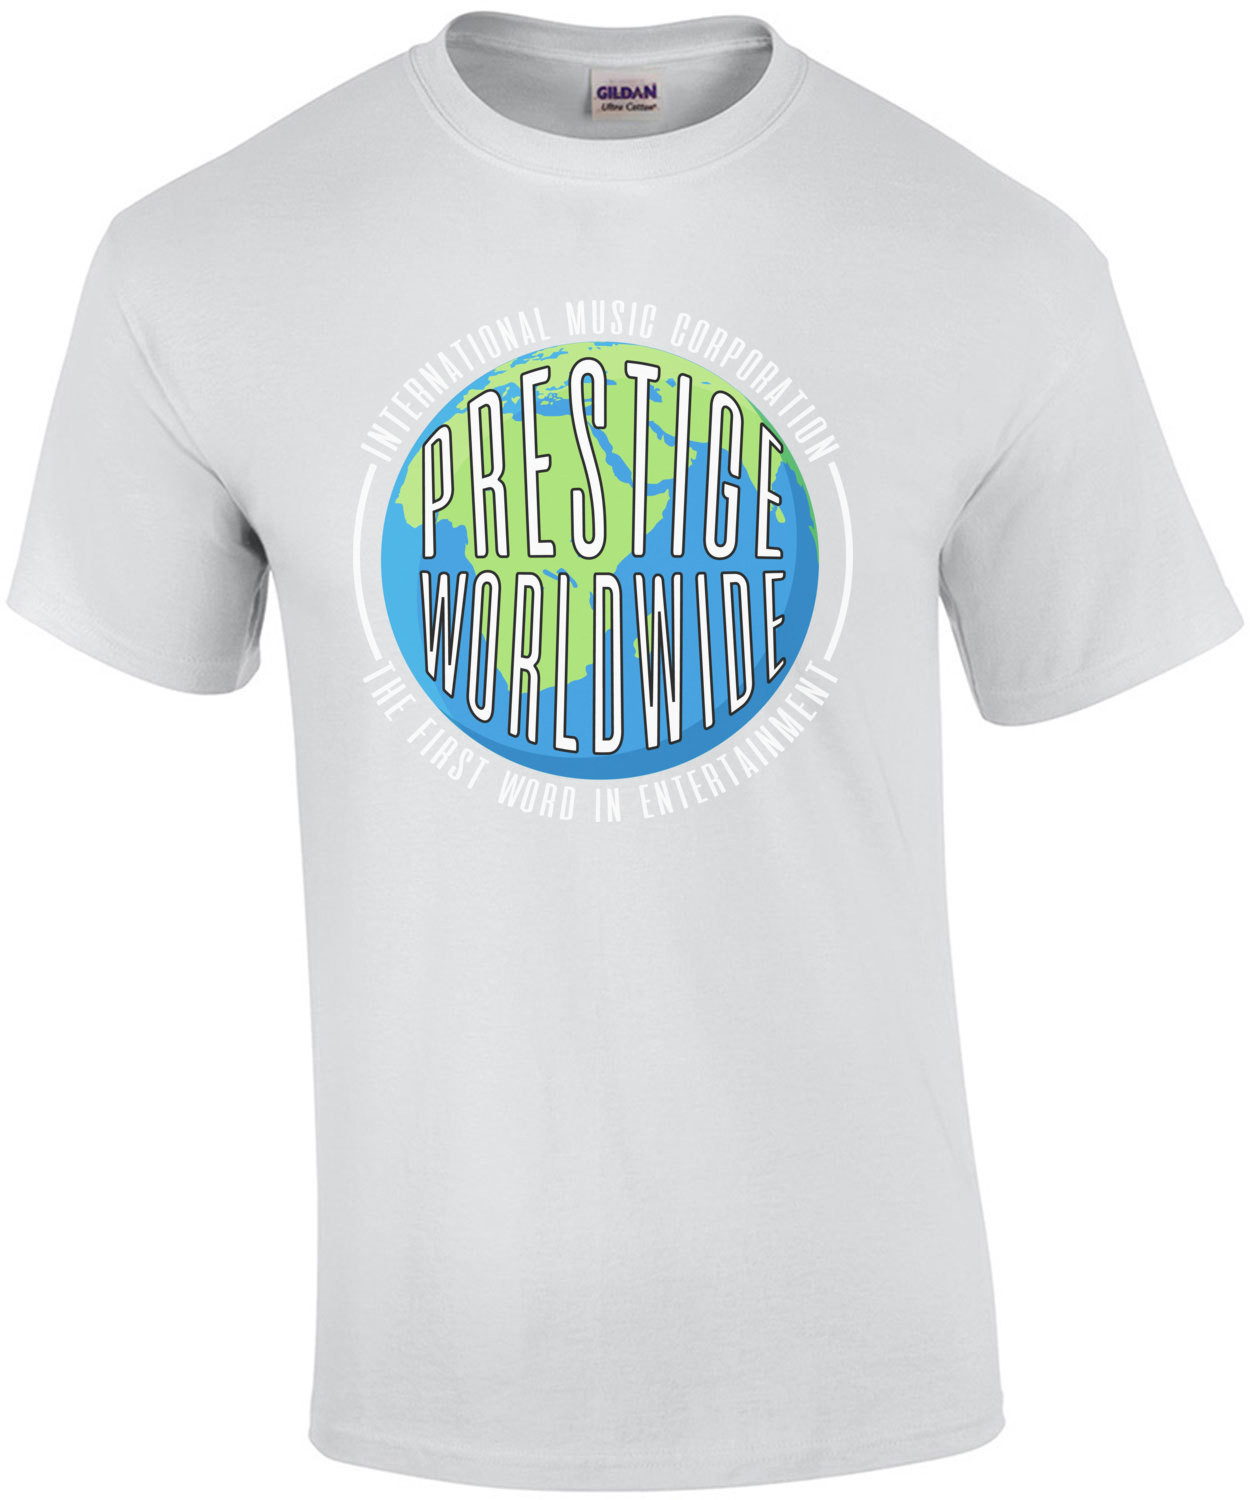 Prestige Worldwide - International Music Corporation - The First Word in Entertainment - Step Brothers T-Shirt